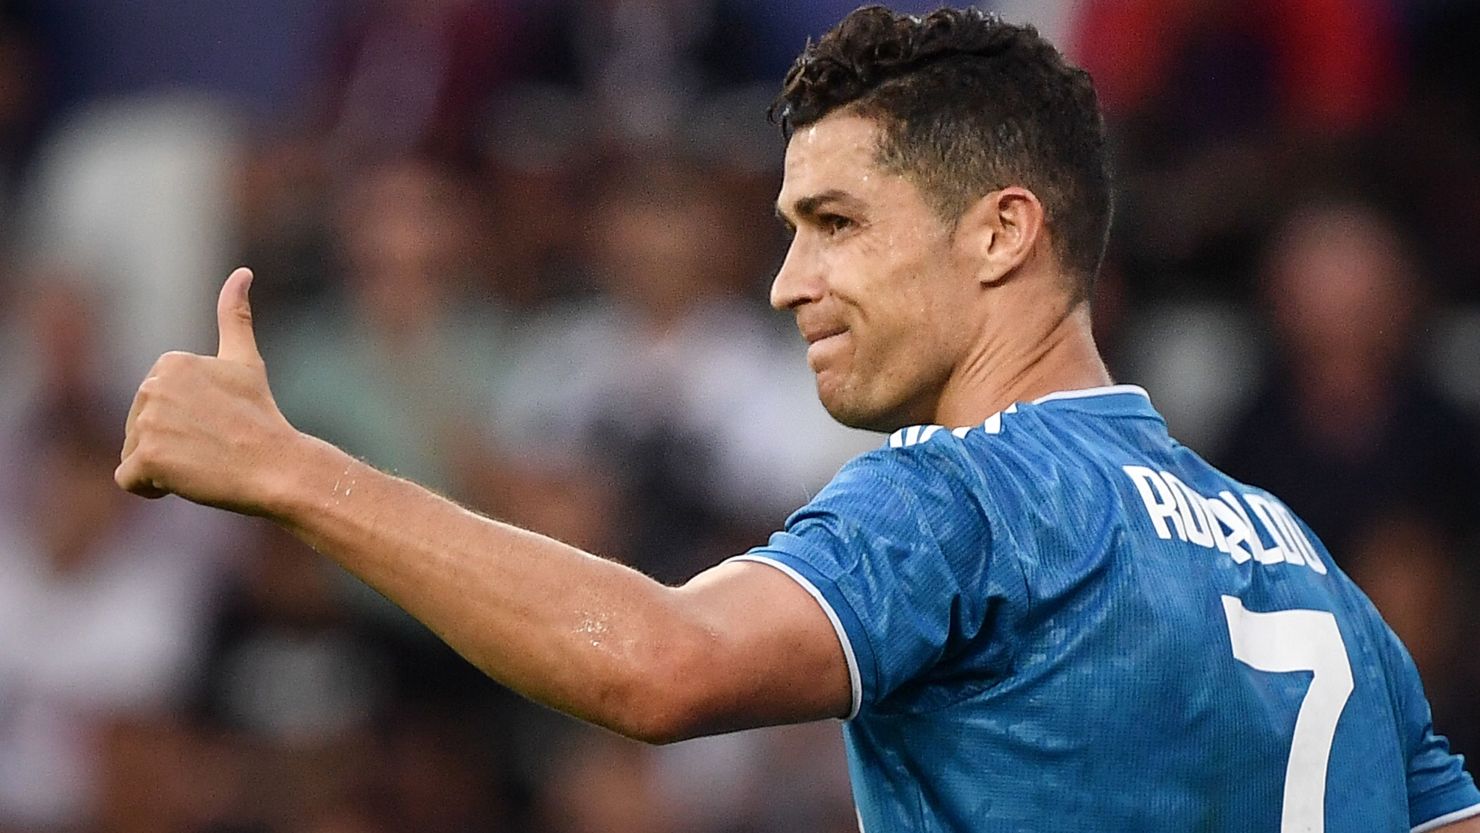 Cristiano Ronaldo is happy with a win for Juventus but had a goal ruled out for offside.